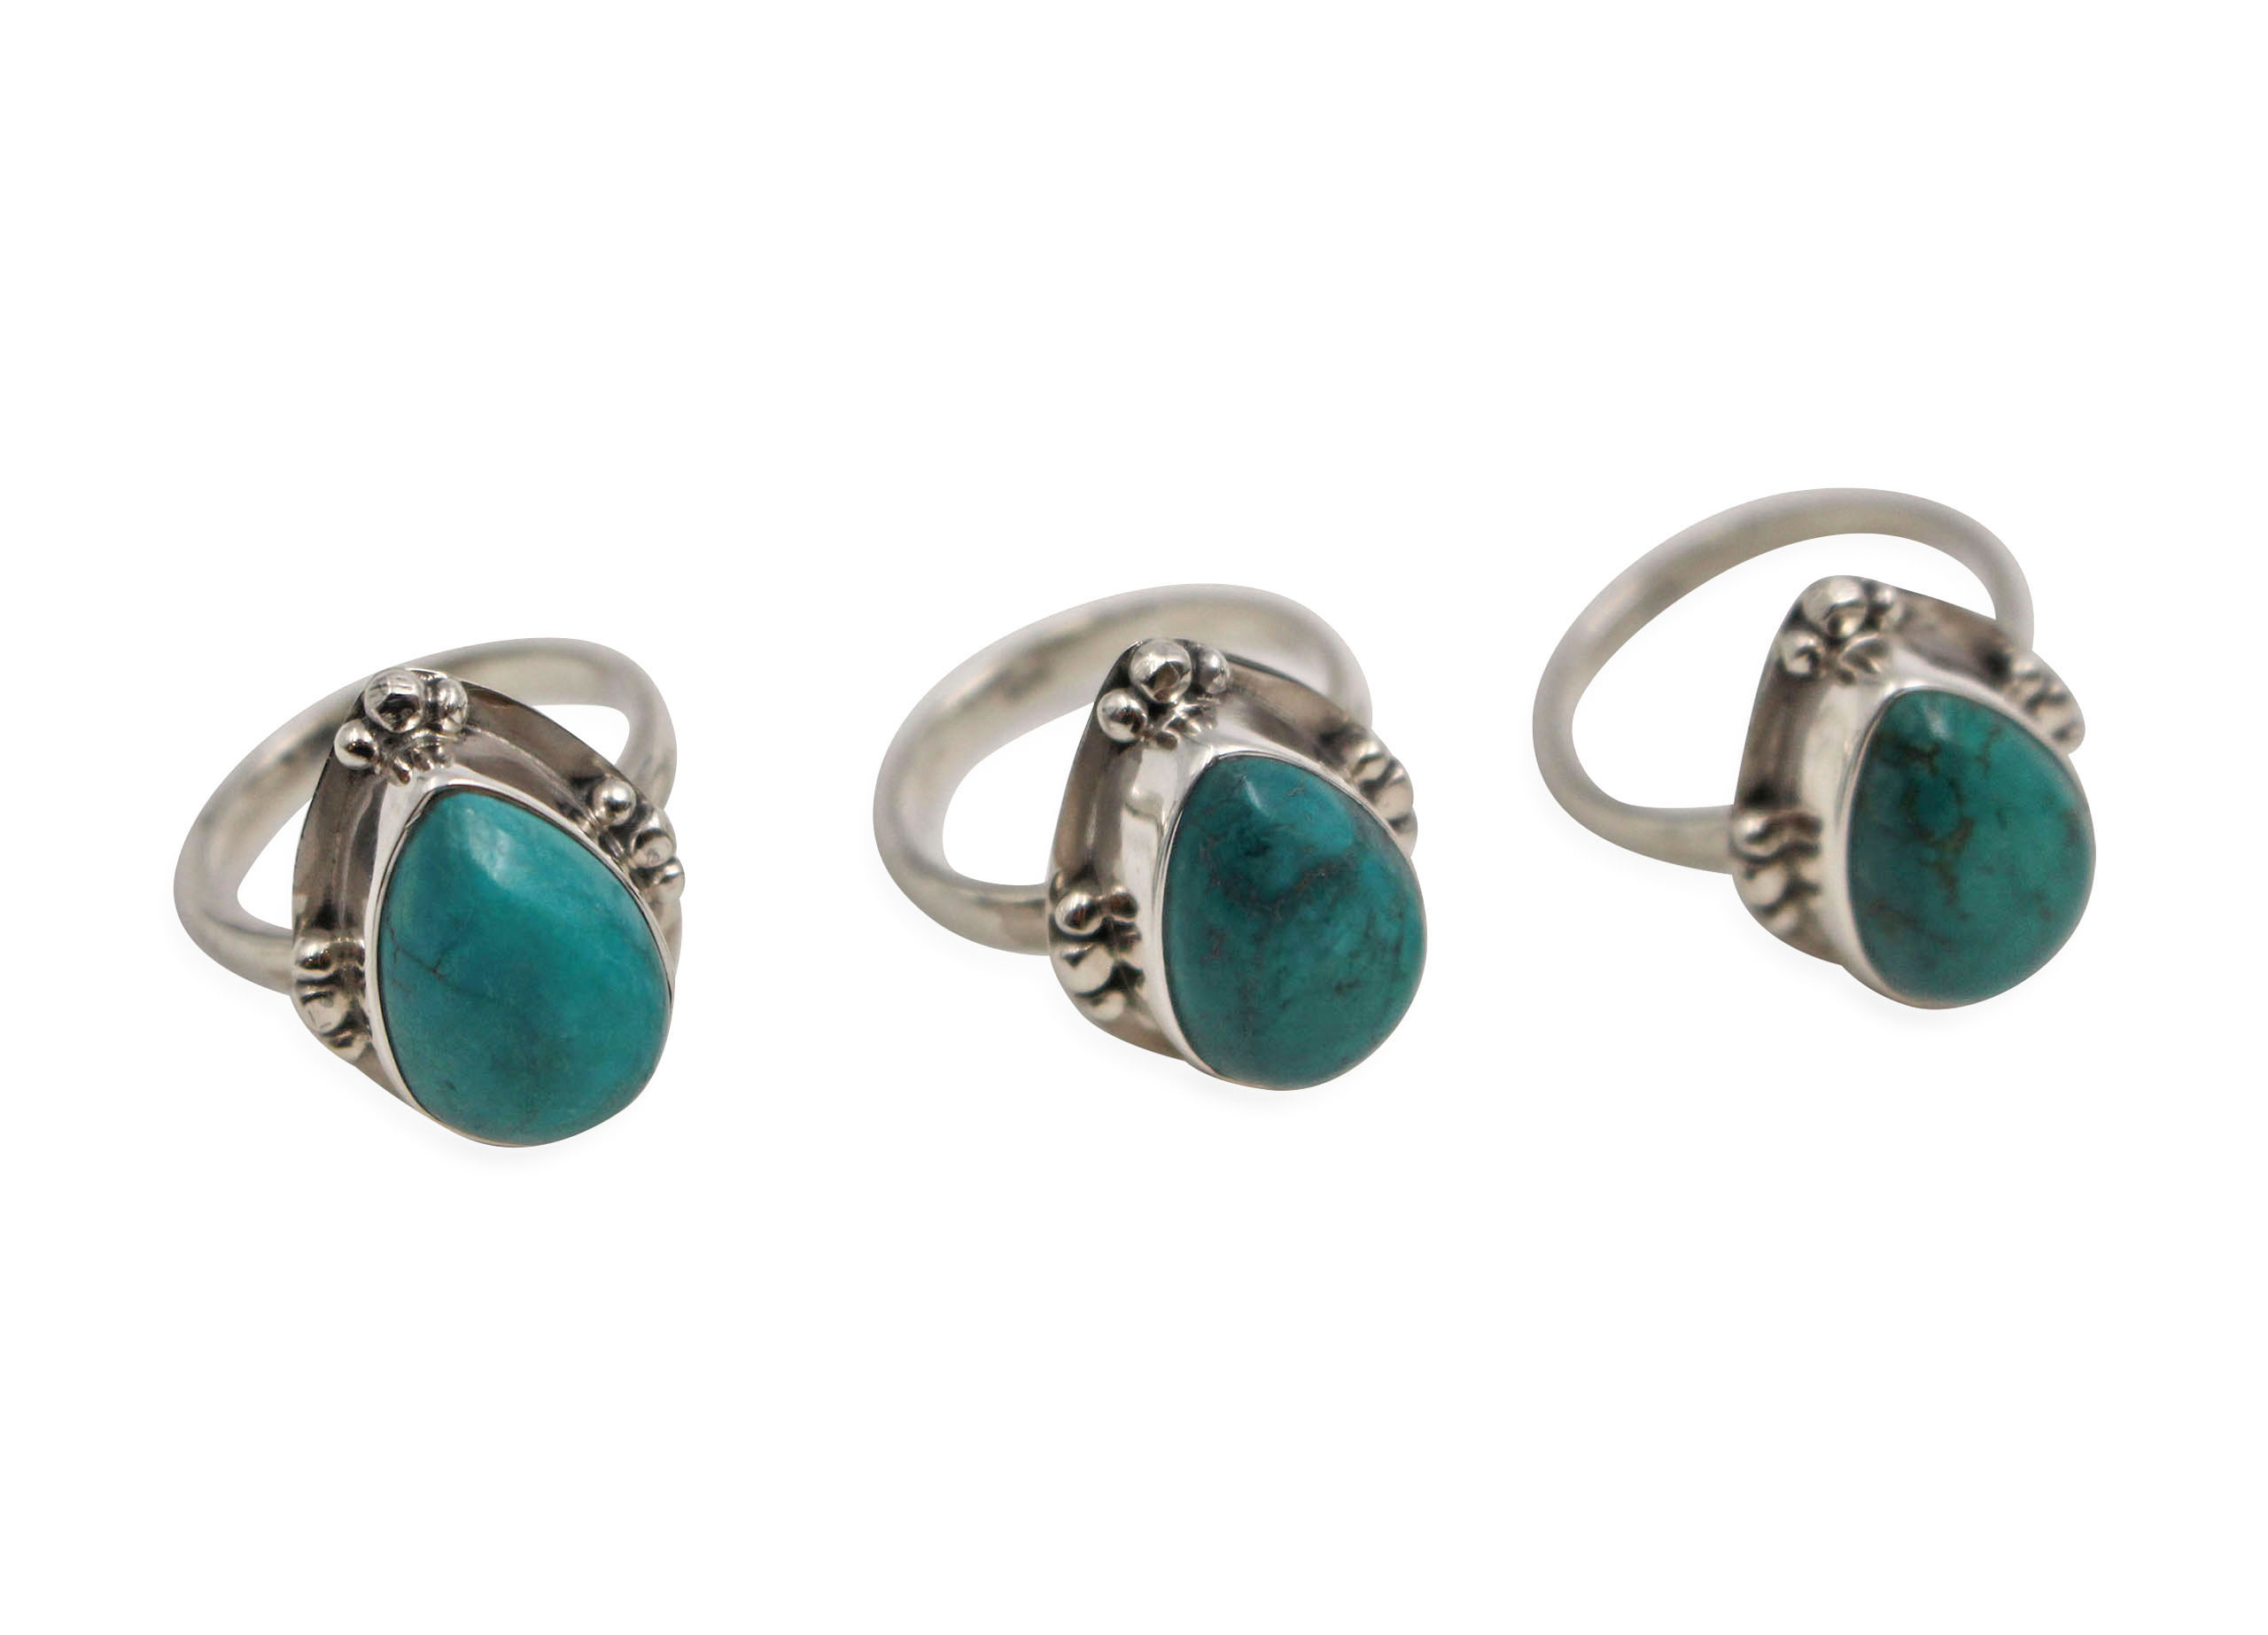 Turquoise "Freeform" sterling silver ring - Crystal Dreams